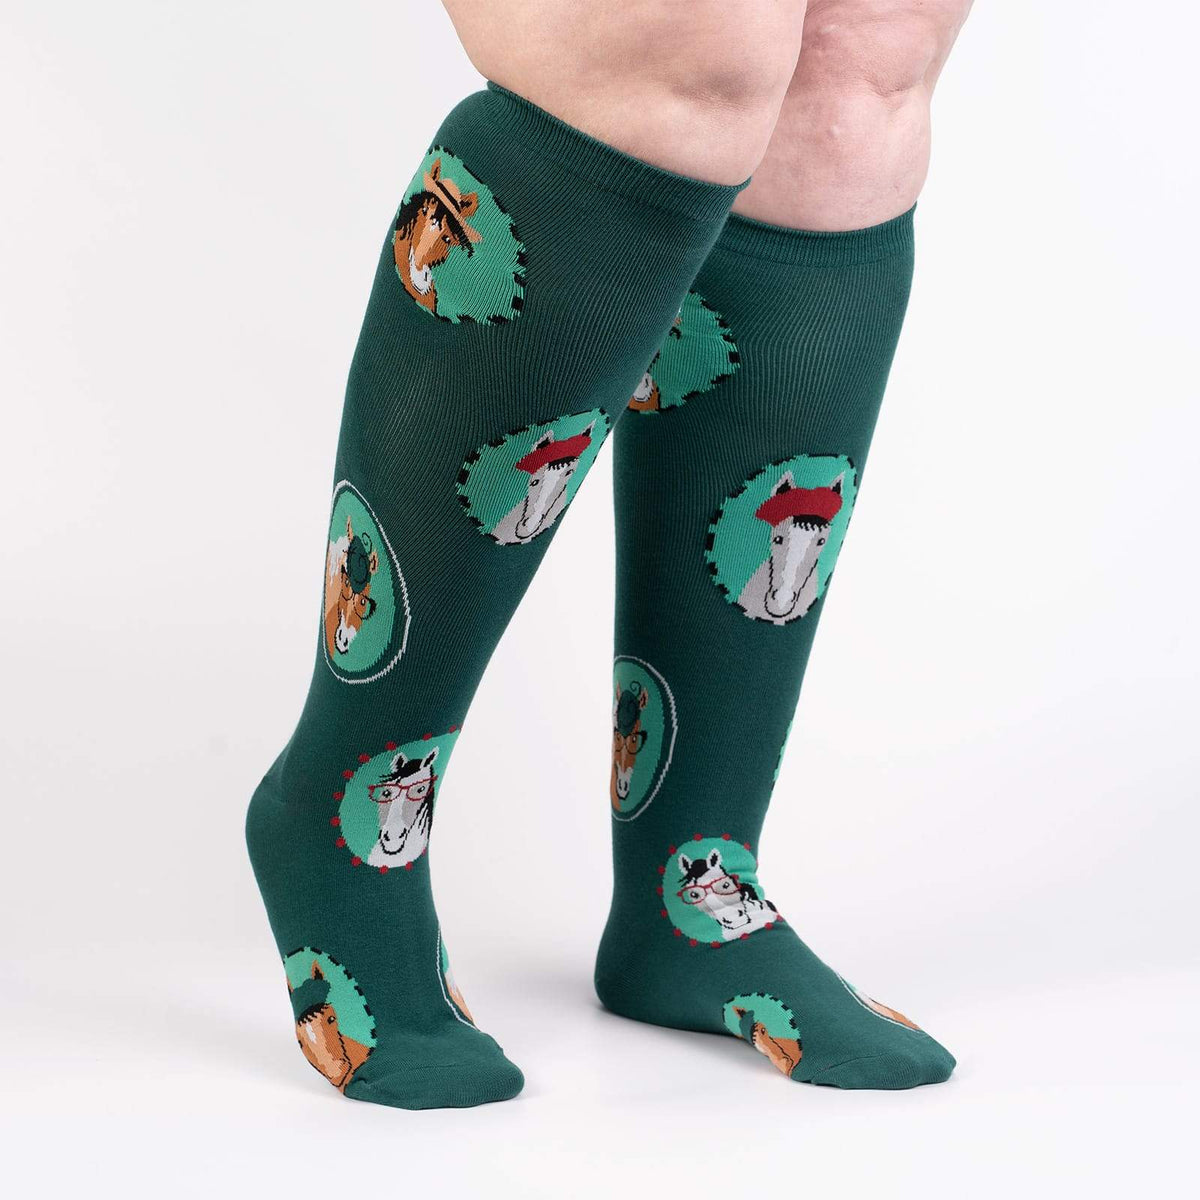 Sock It To Me Horsing Around extra-stretchy women&#39;s and men&#39;s knee high socks featuring teal socks with pictures of horses wearing hats and/or glasses. Socks shown on model from side. 